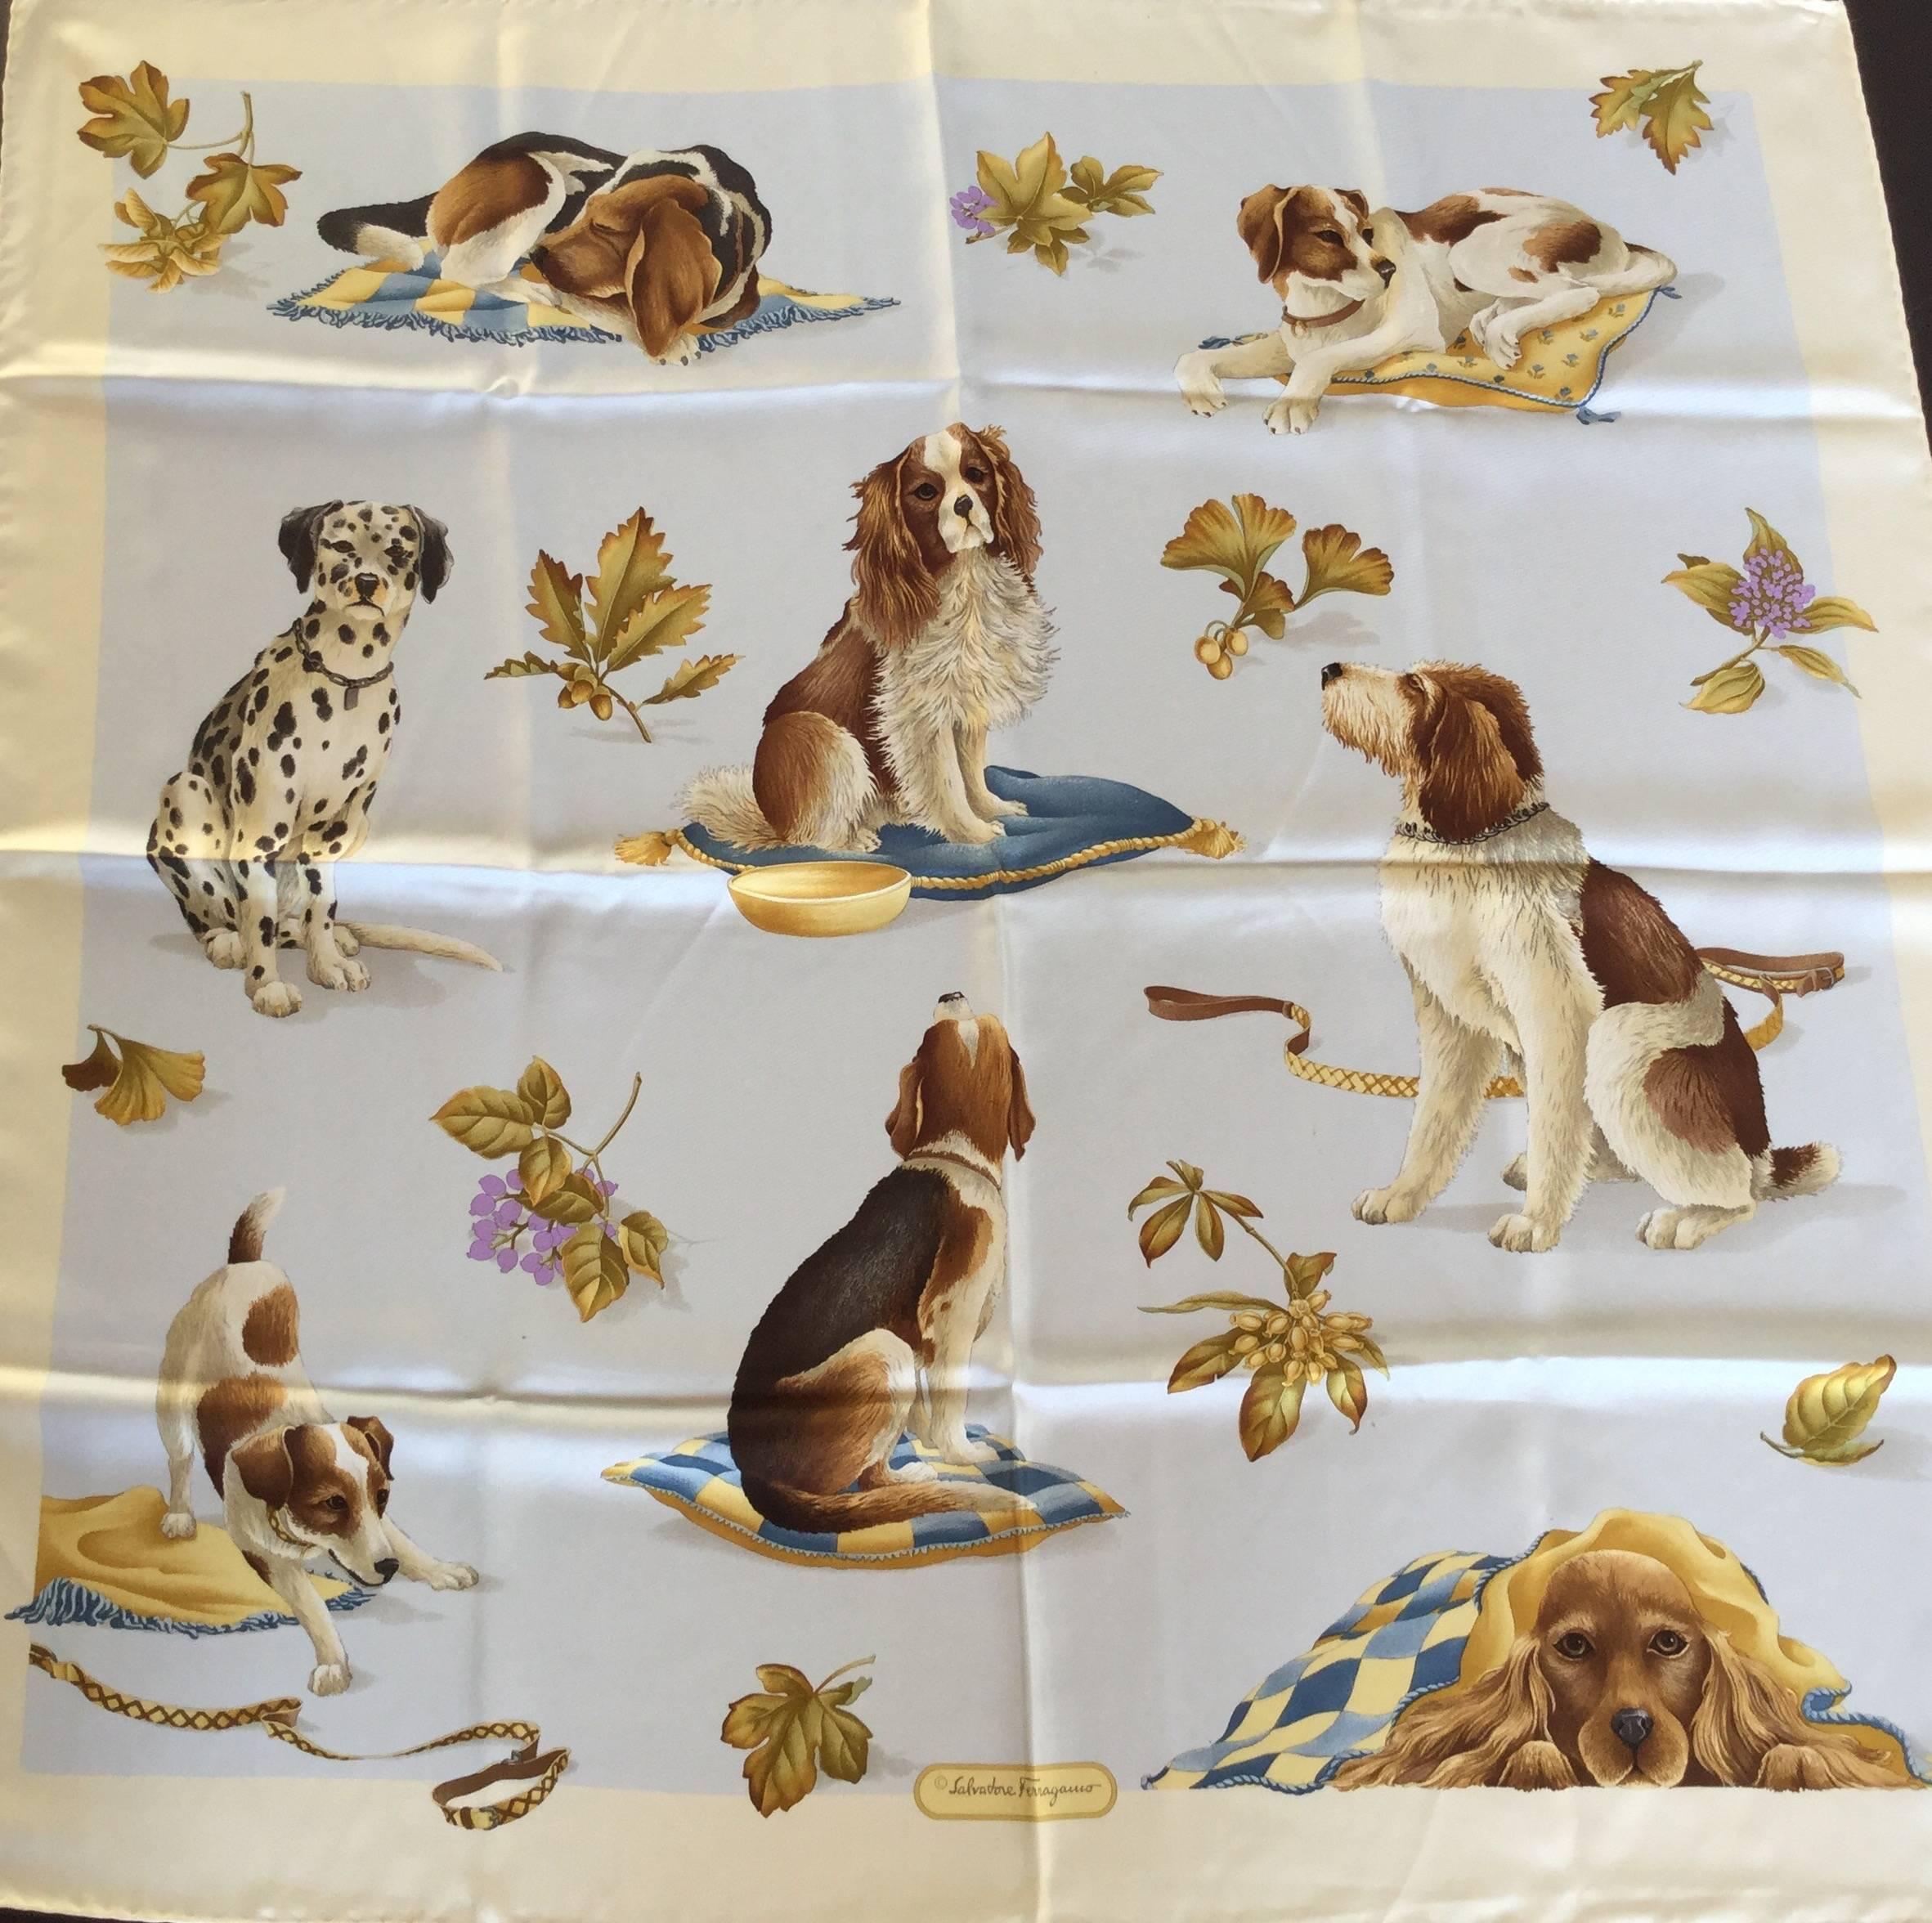 This Ferragamo dog themed scarf with the pale blue background is one of his rarest and most beautiful. The detail is simply stunning. Eight different dog breeds are depicted in various poses with various gazes. The colors are rich yet restrained in